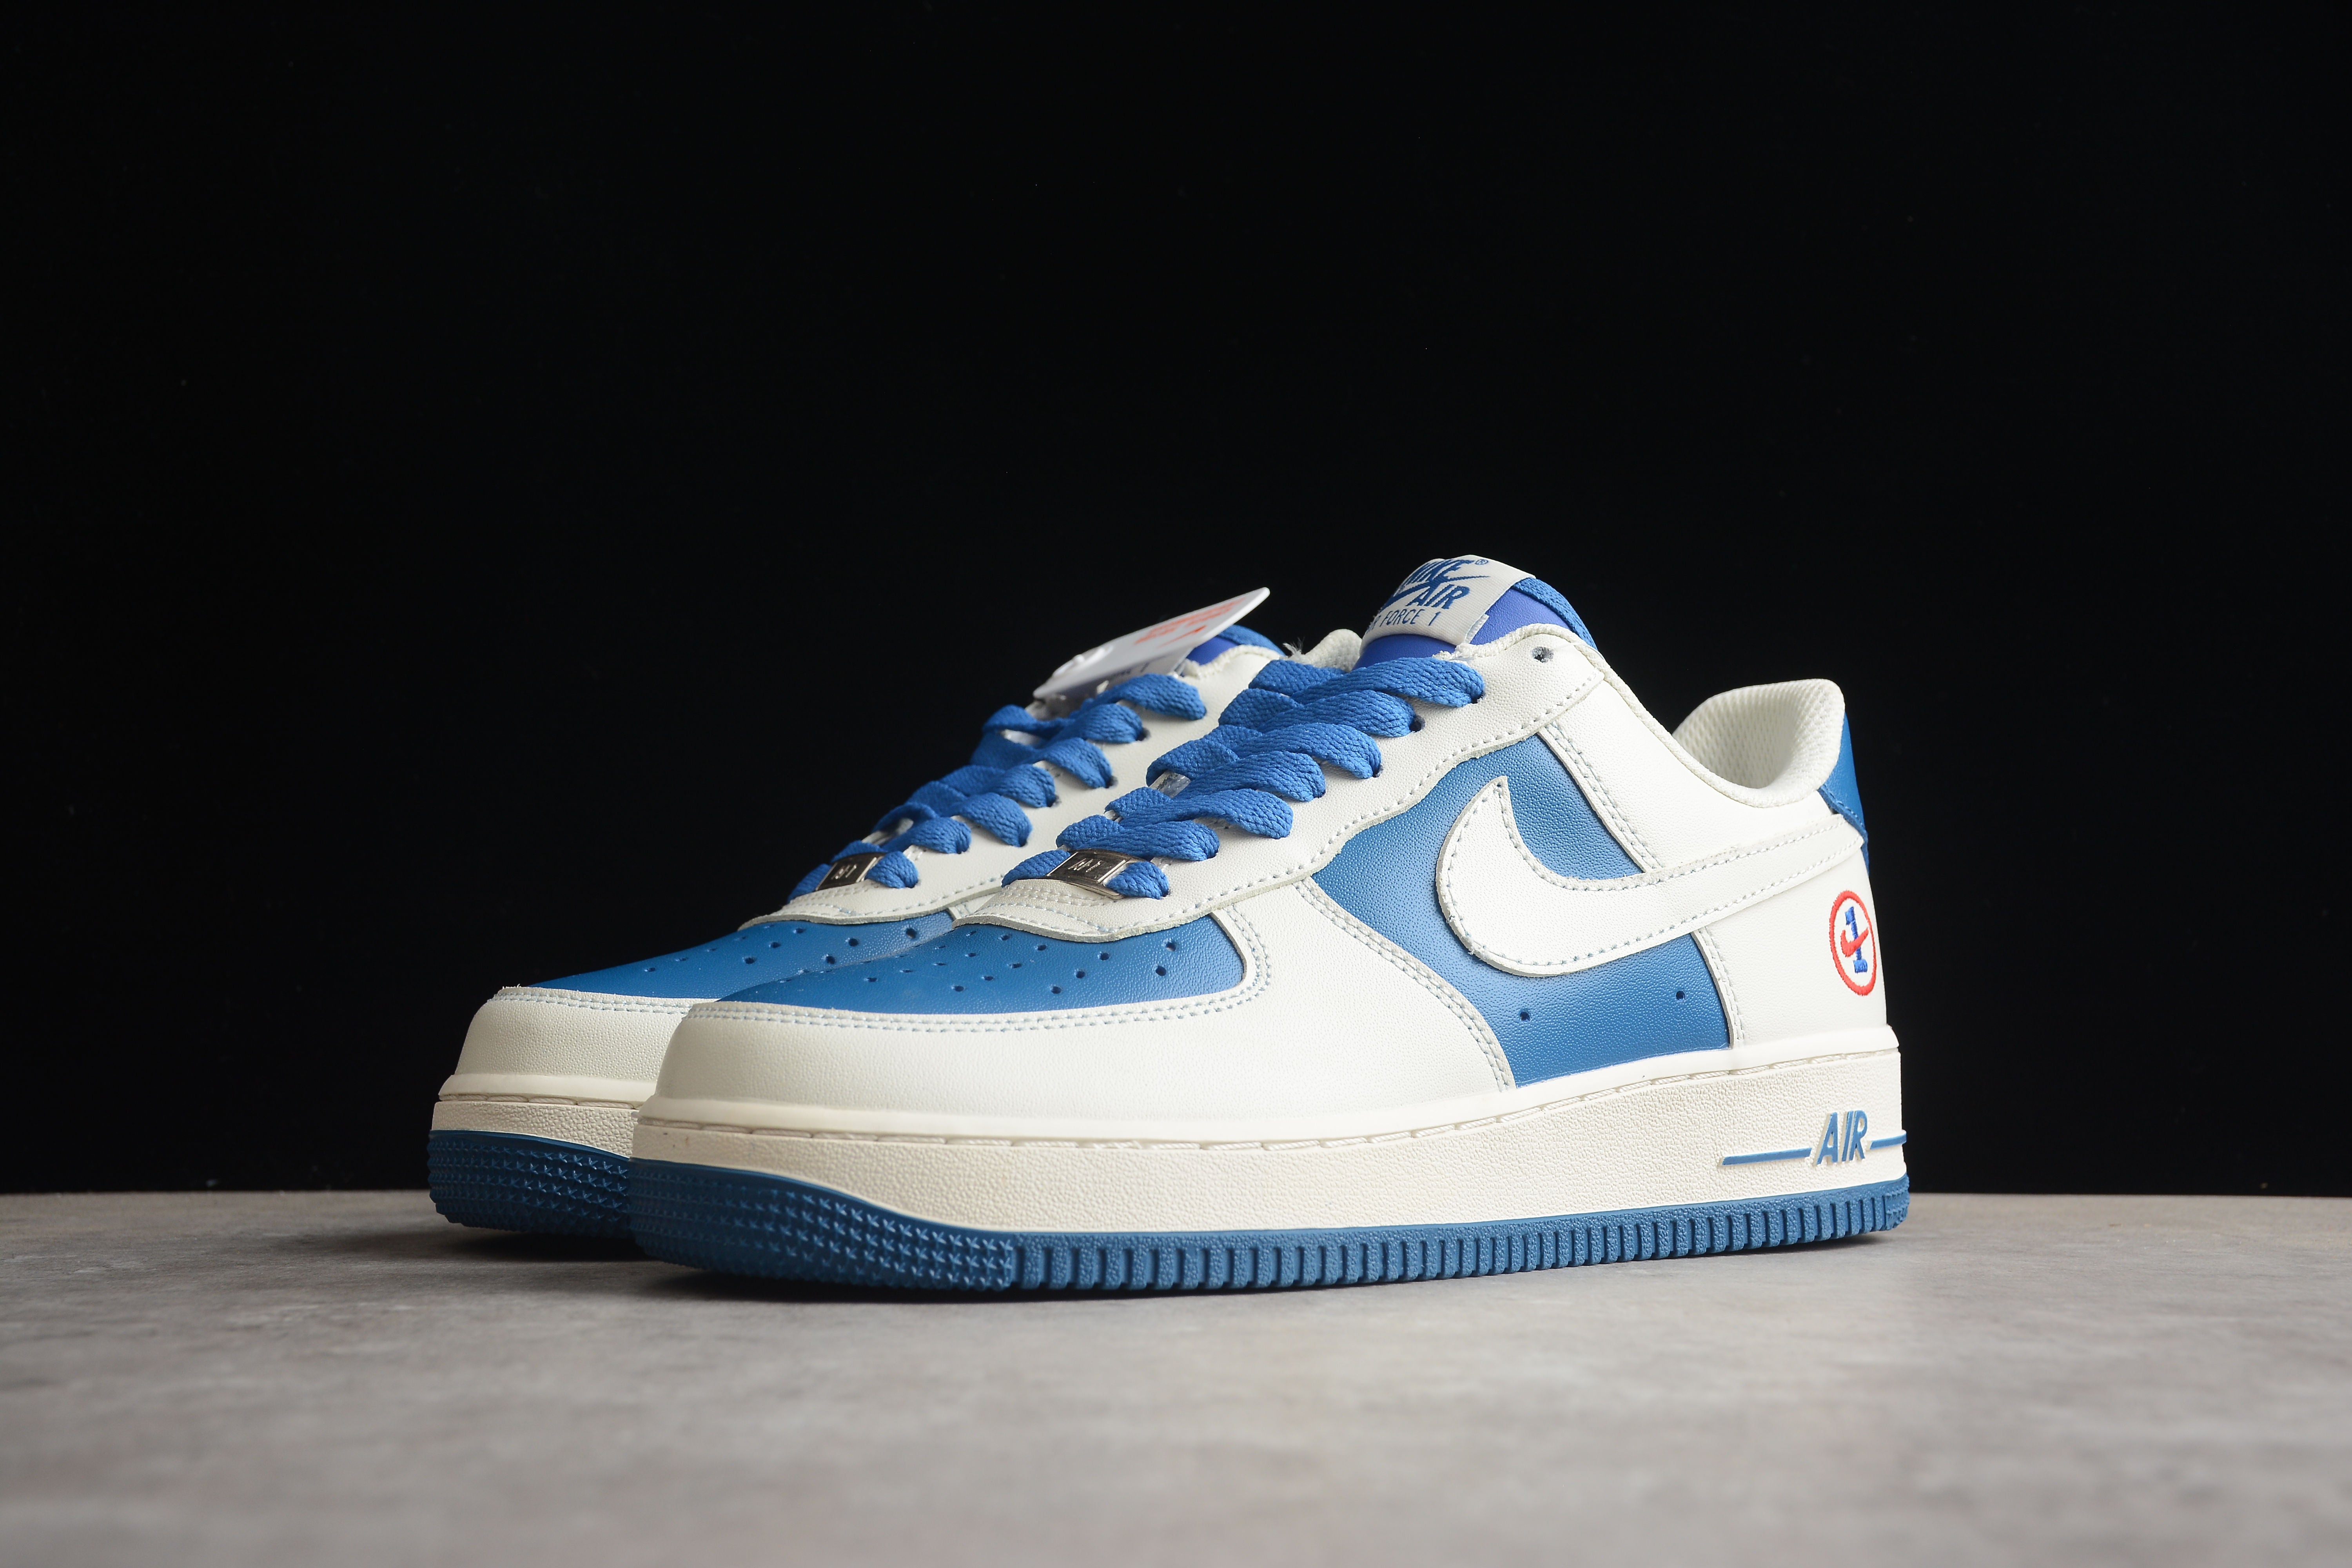 Nike airforce A1 Nb 1 shoes